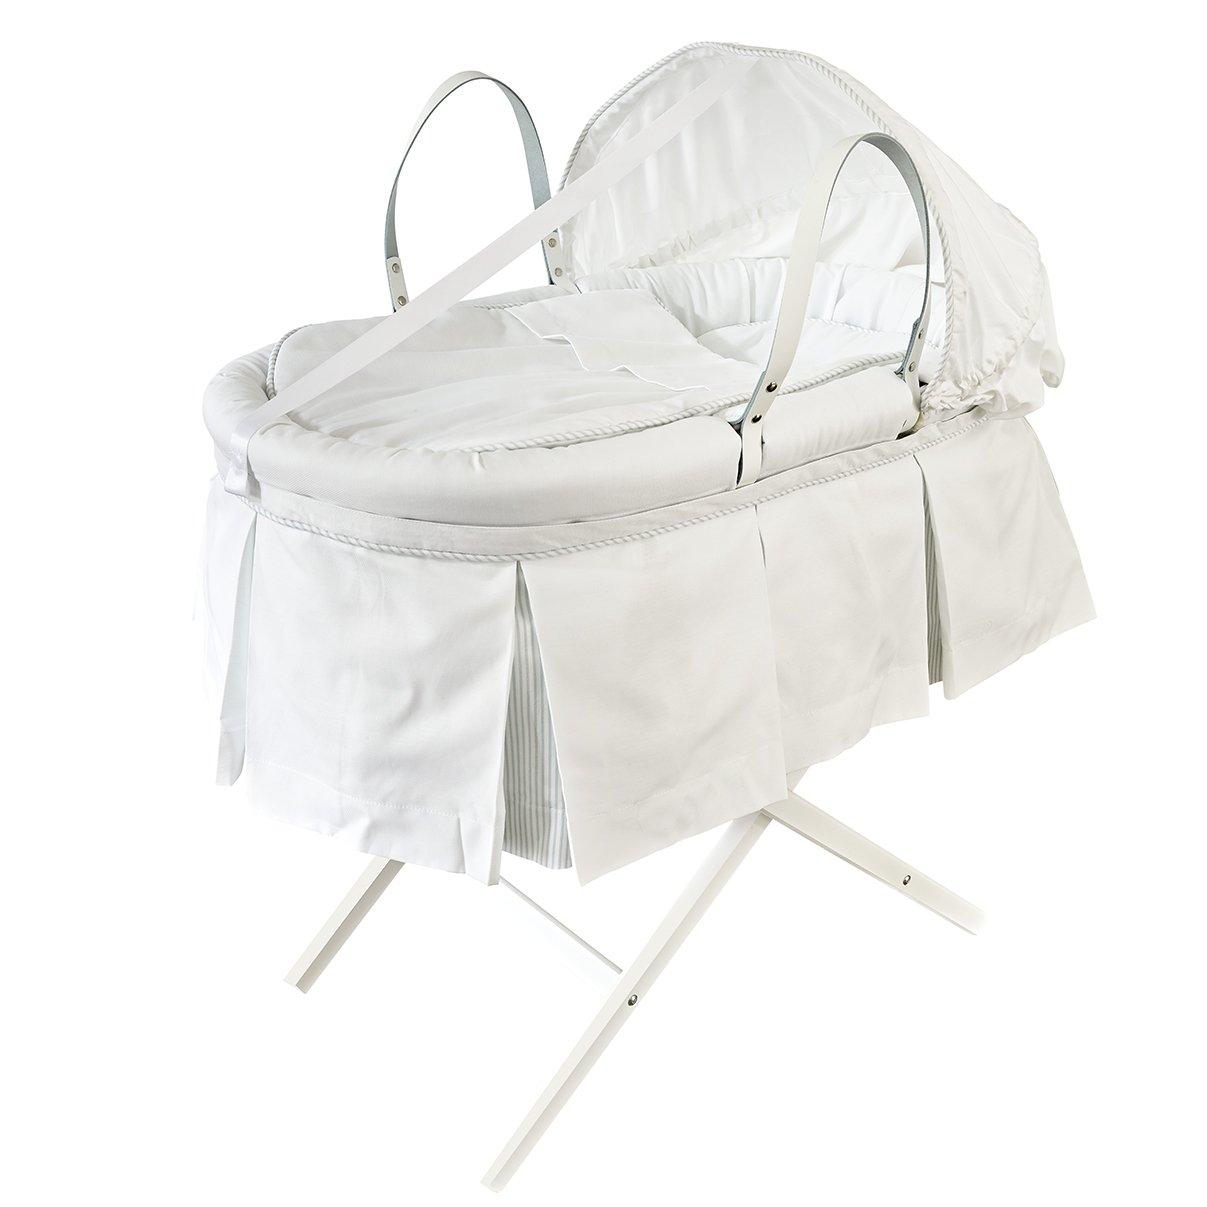 Baby moses basket with stand with pleated skirt and hood | Dragons of Walton Street